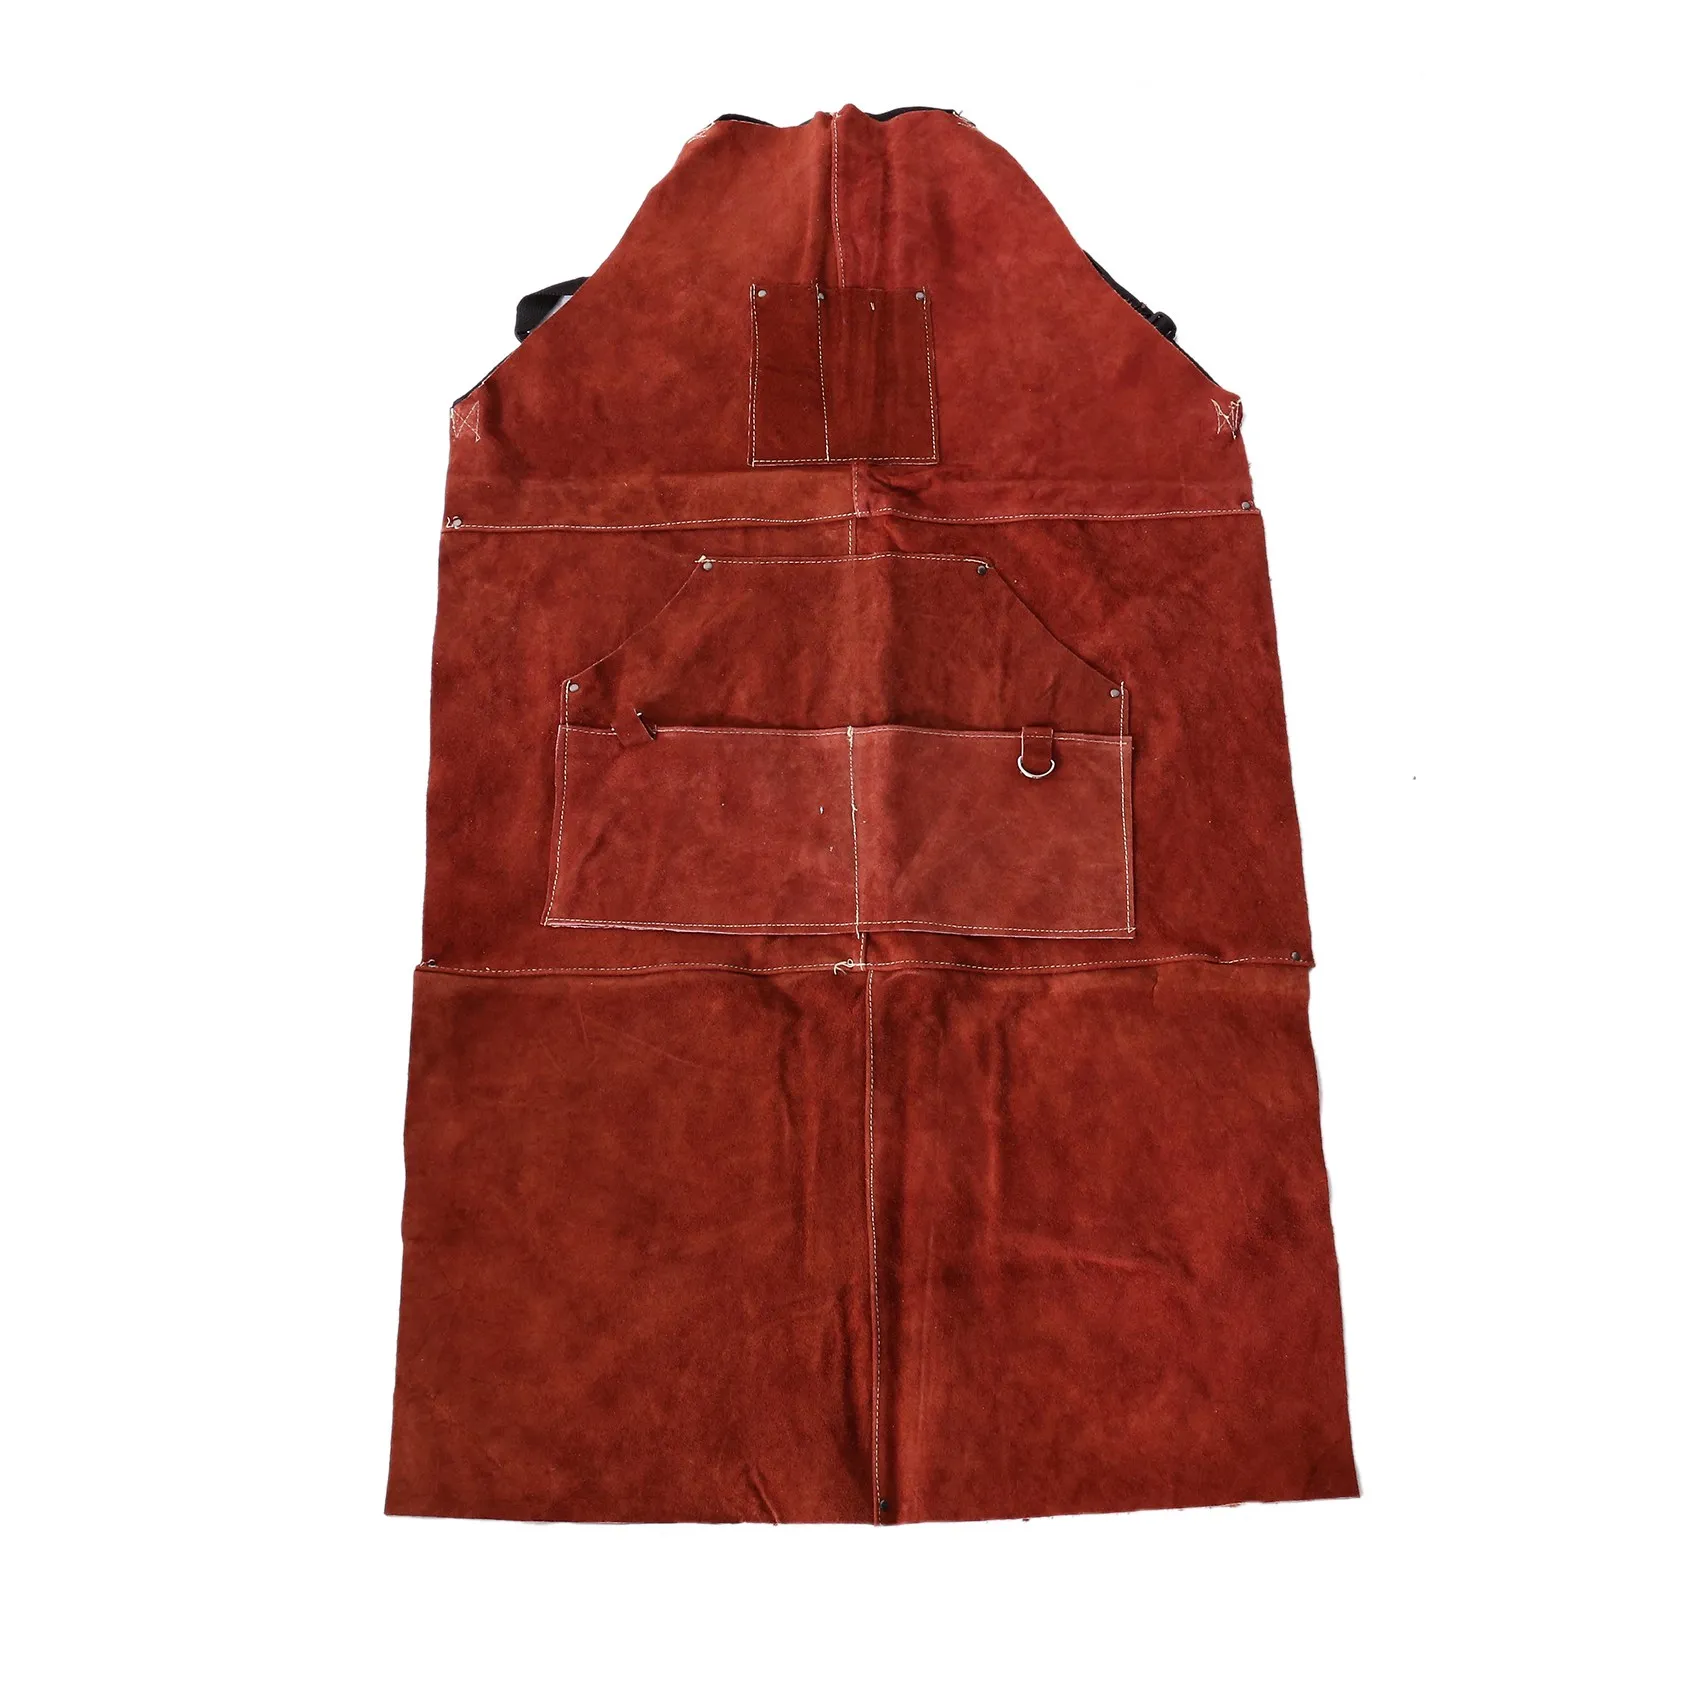 

Leather Welding Apron - Heat & Flame-Resistant Heavy Duty Work Forge Apron with 6 Pockets 42Inch Large